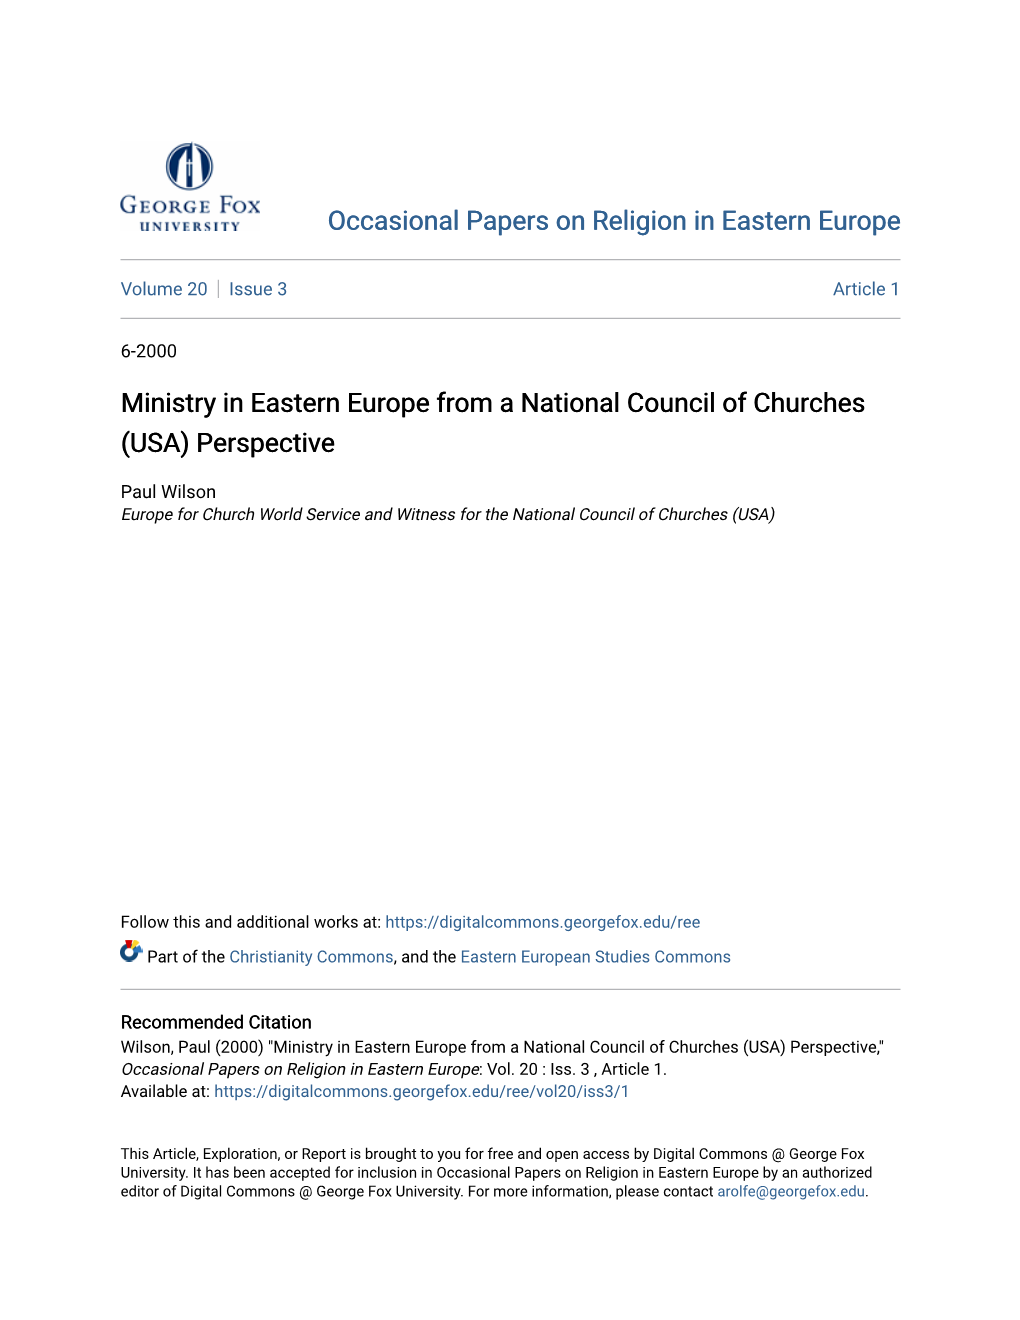 Ministry in Eastern Europe from a National Council of Churches (USA) Perspective